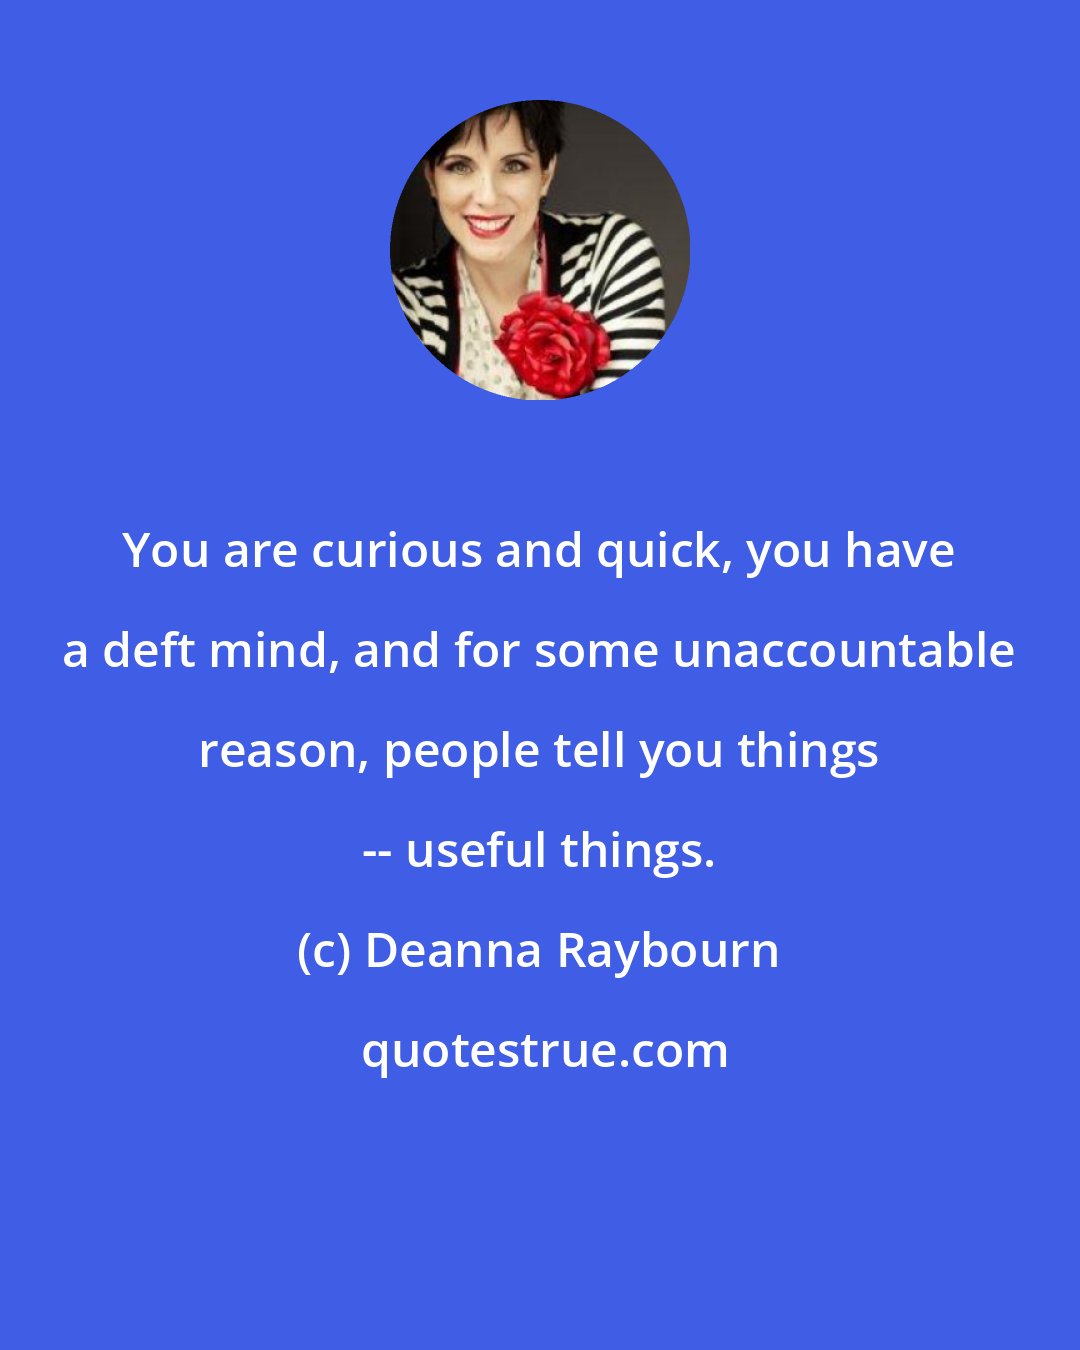 Deanna Raybourn: You are curious and quick, you have a deft mind, and for some unaccountable reason, people tell you things -- useful things.